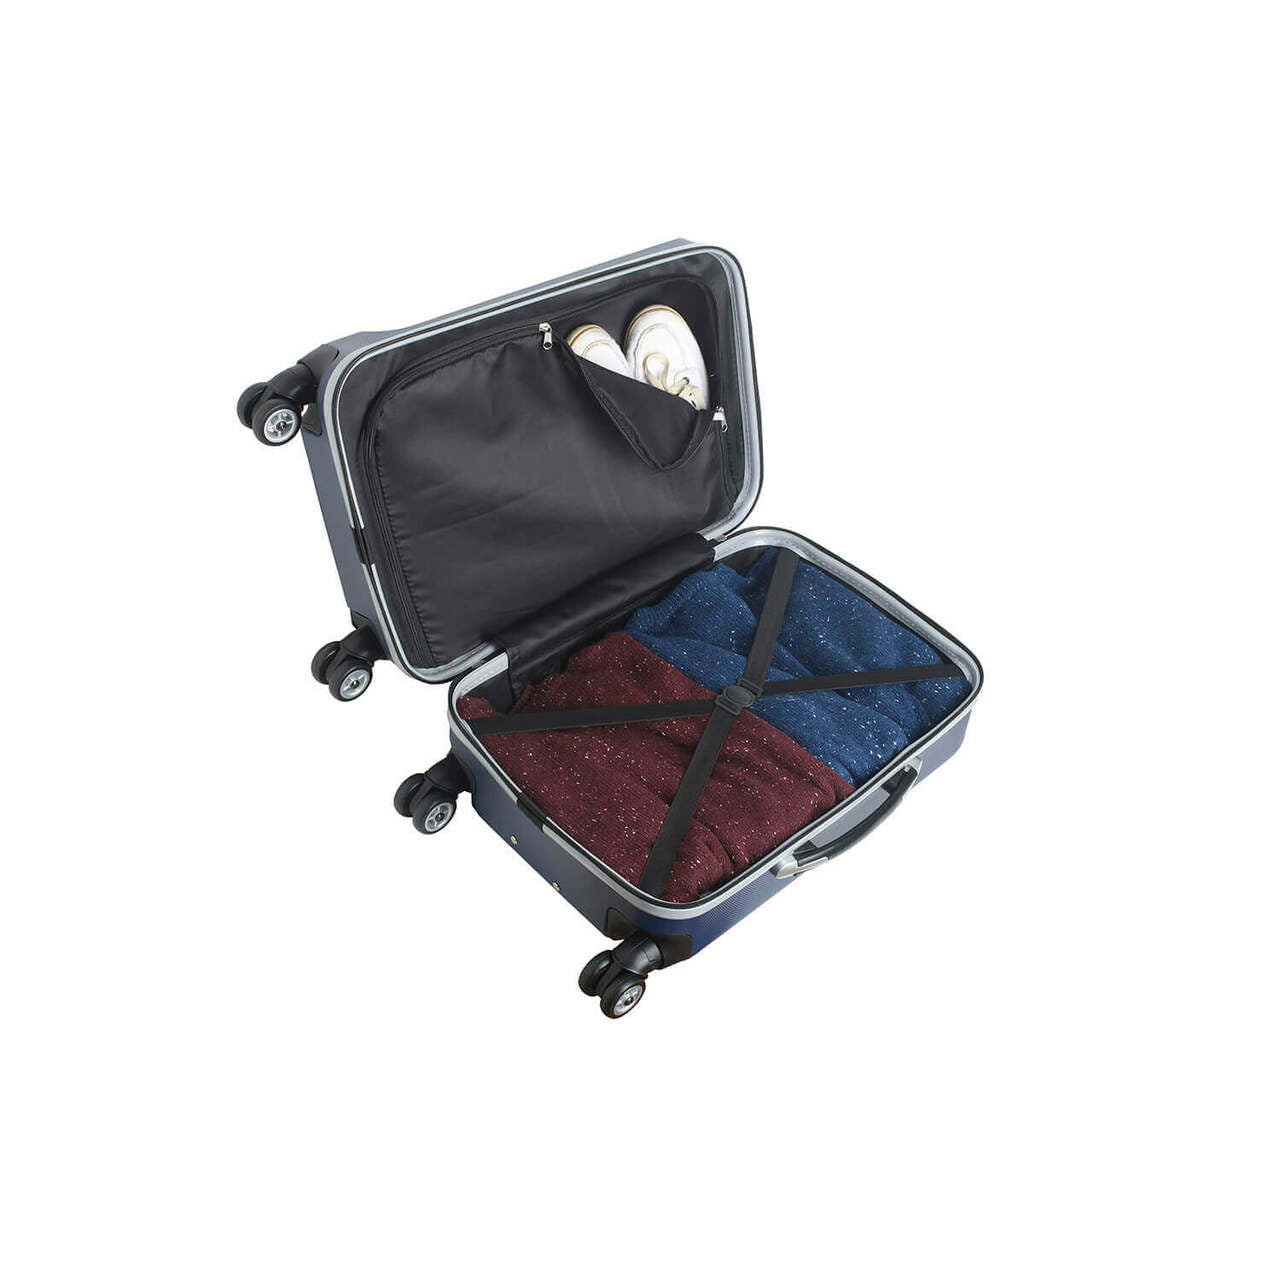 Louisville Cardinals 20" Navy Domestic Carry-on Spinner